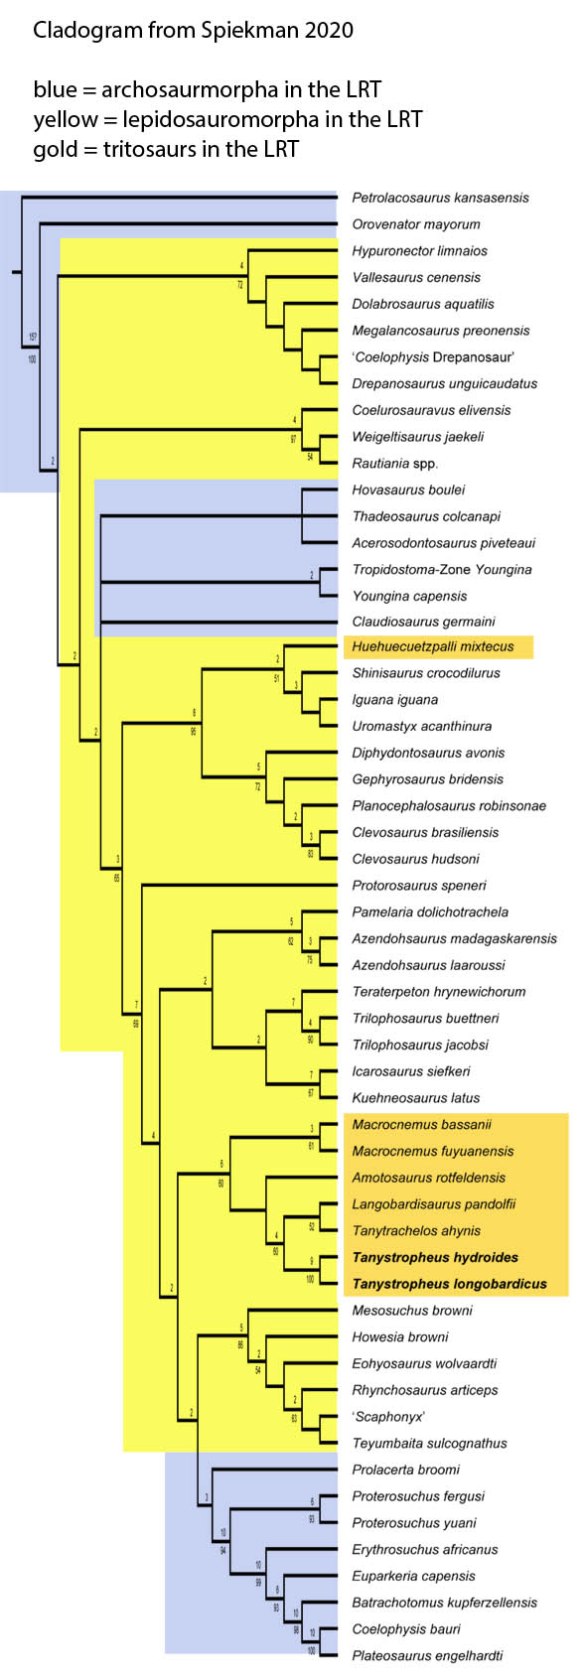 Figure 2. Cladogram from Spiekman et al. 2020. Colors added here to show mixing of archosauromorphs and lepidosauromorphs from the LRT. 